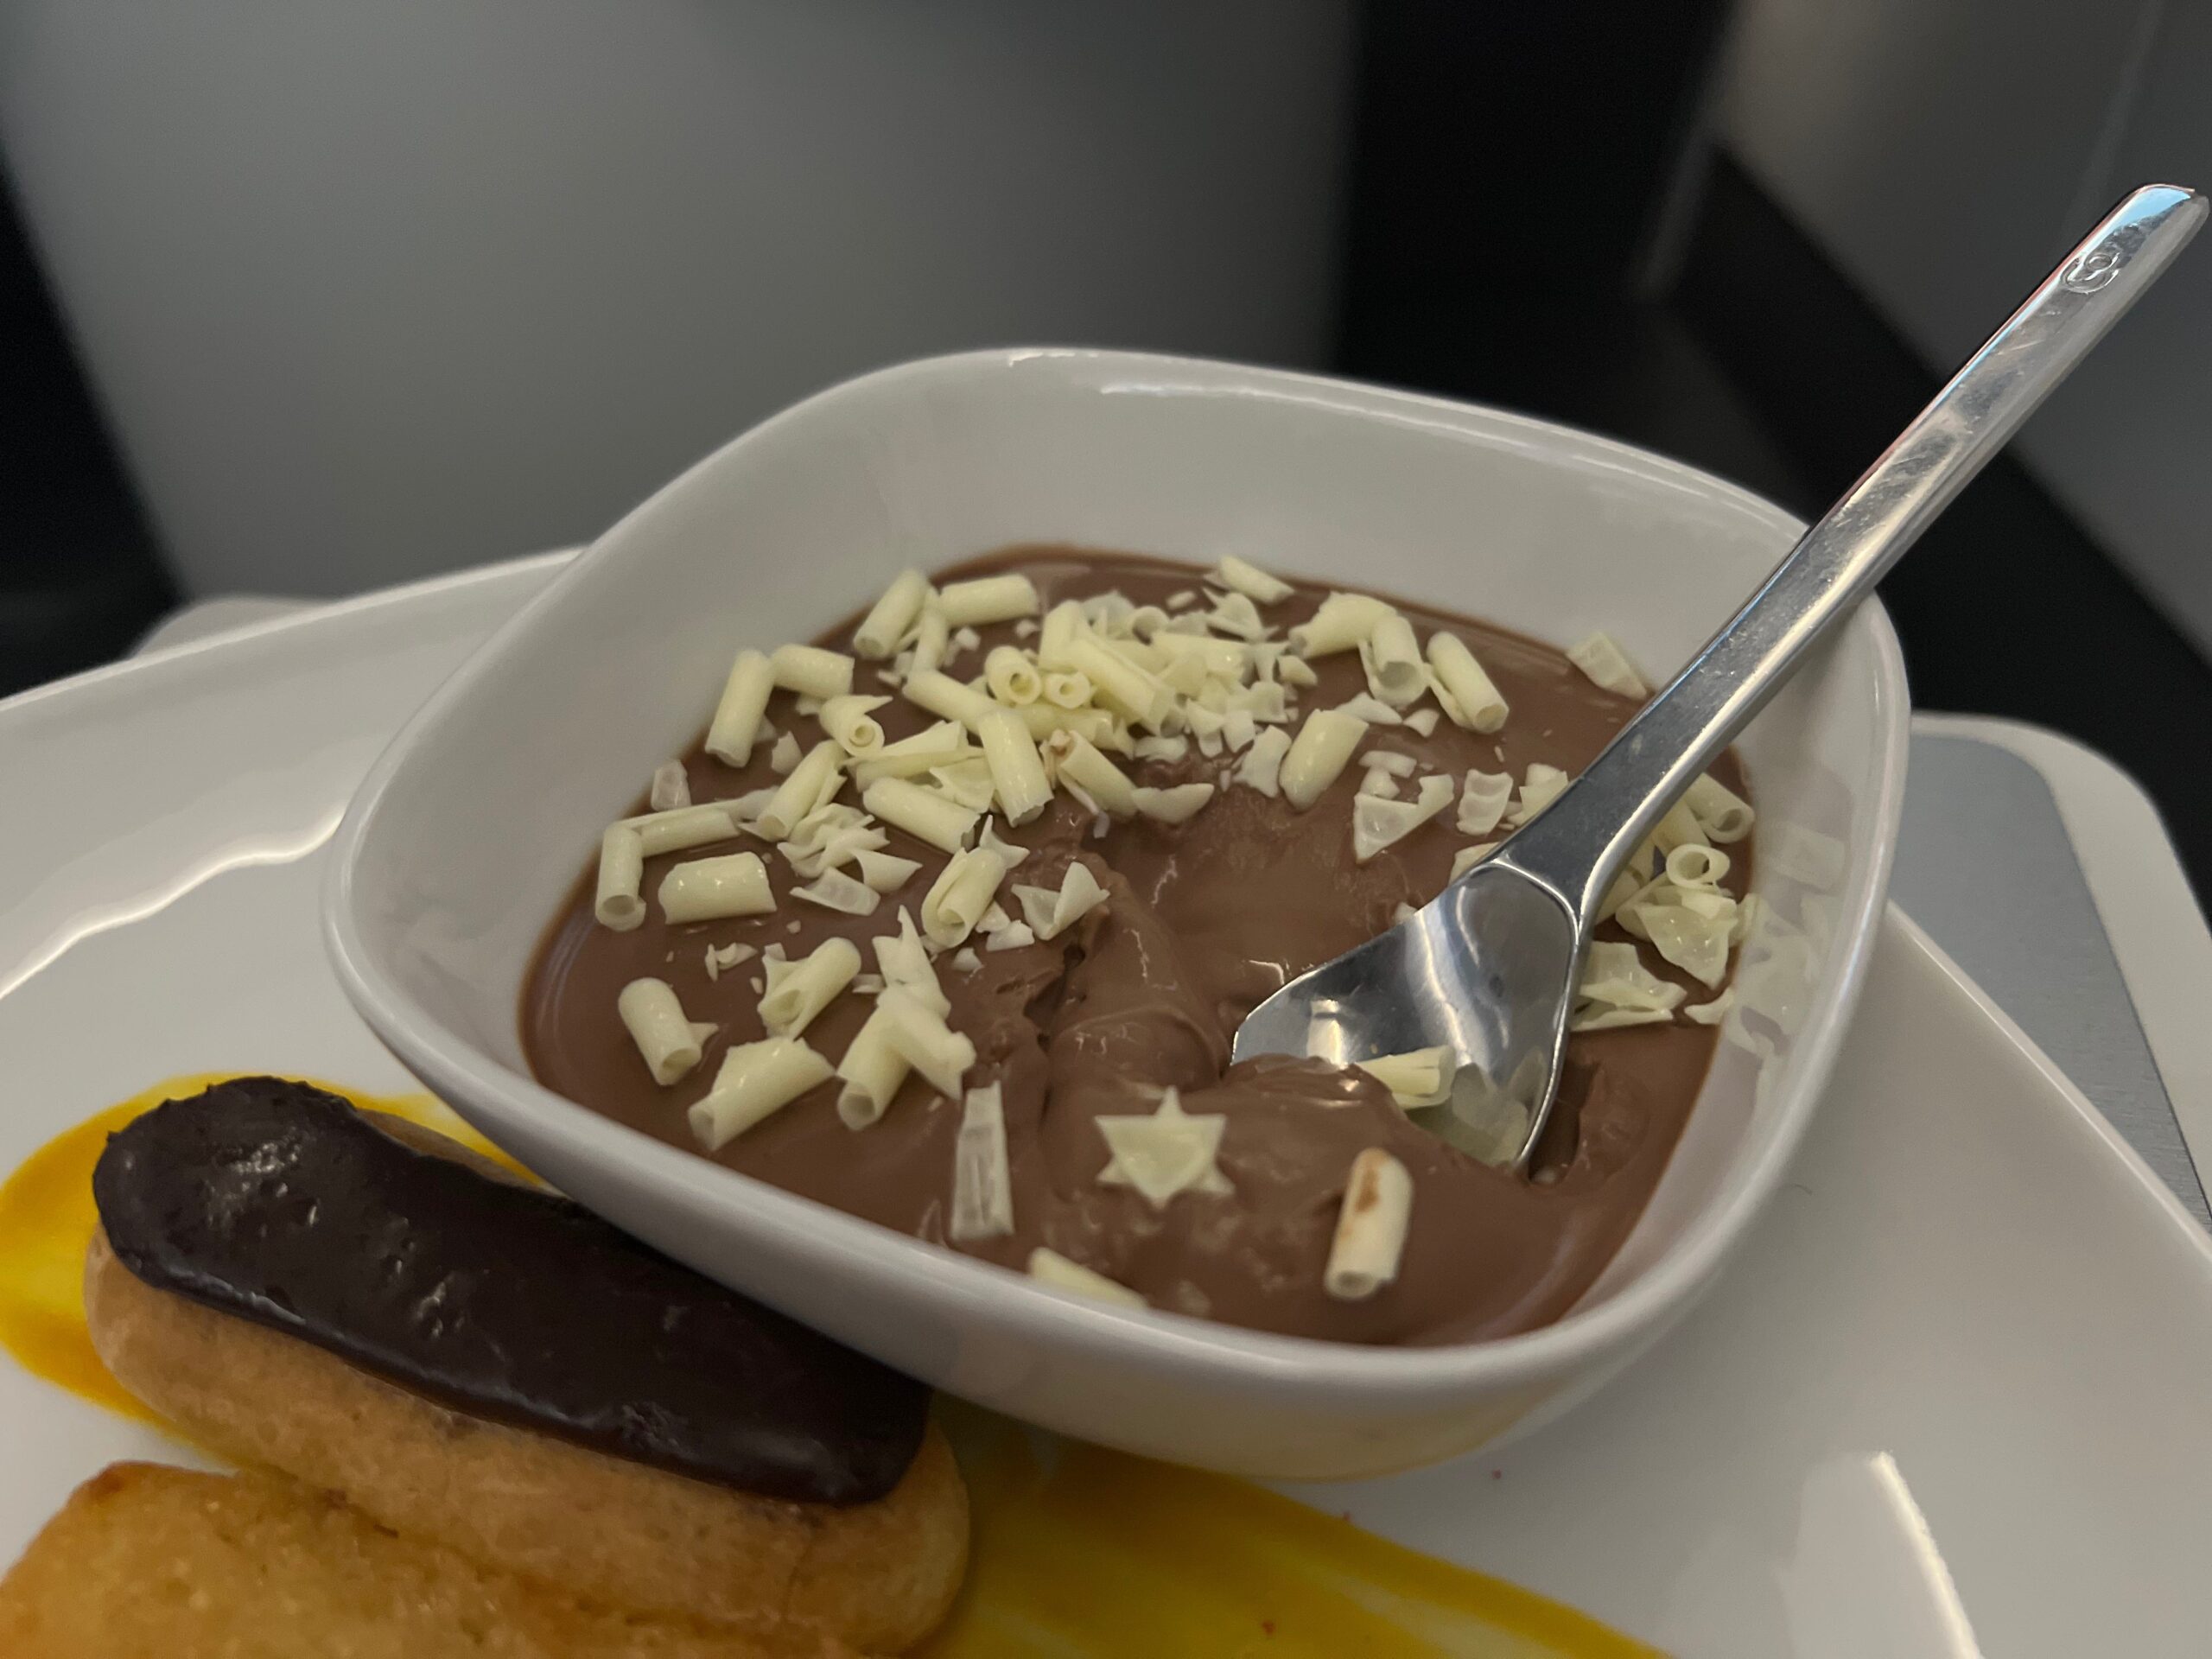 Flying on La Compagnie all-business class airline from Paris to New York &mdash; the pudding.